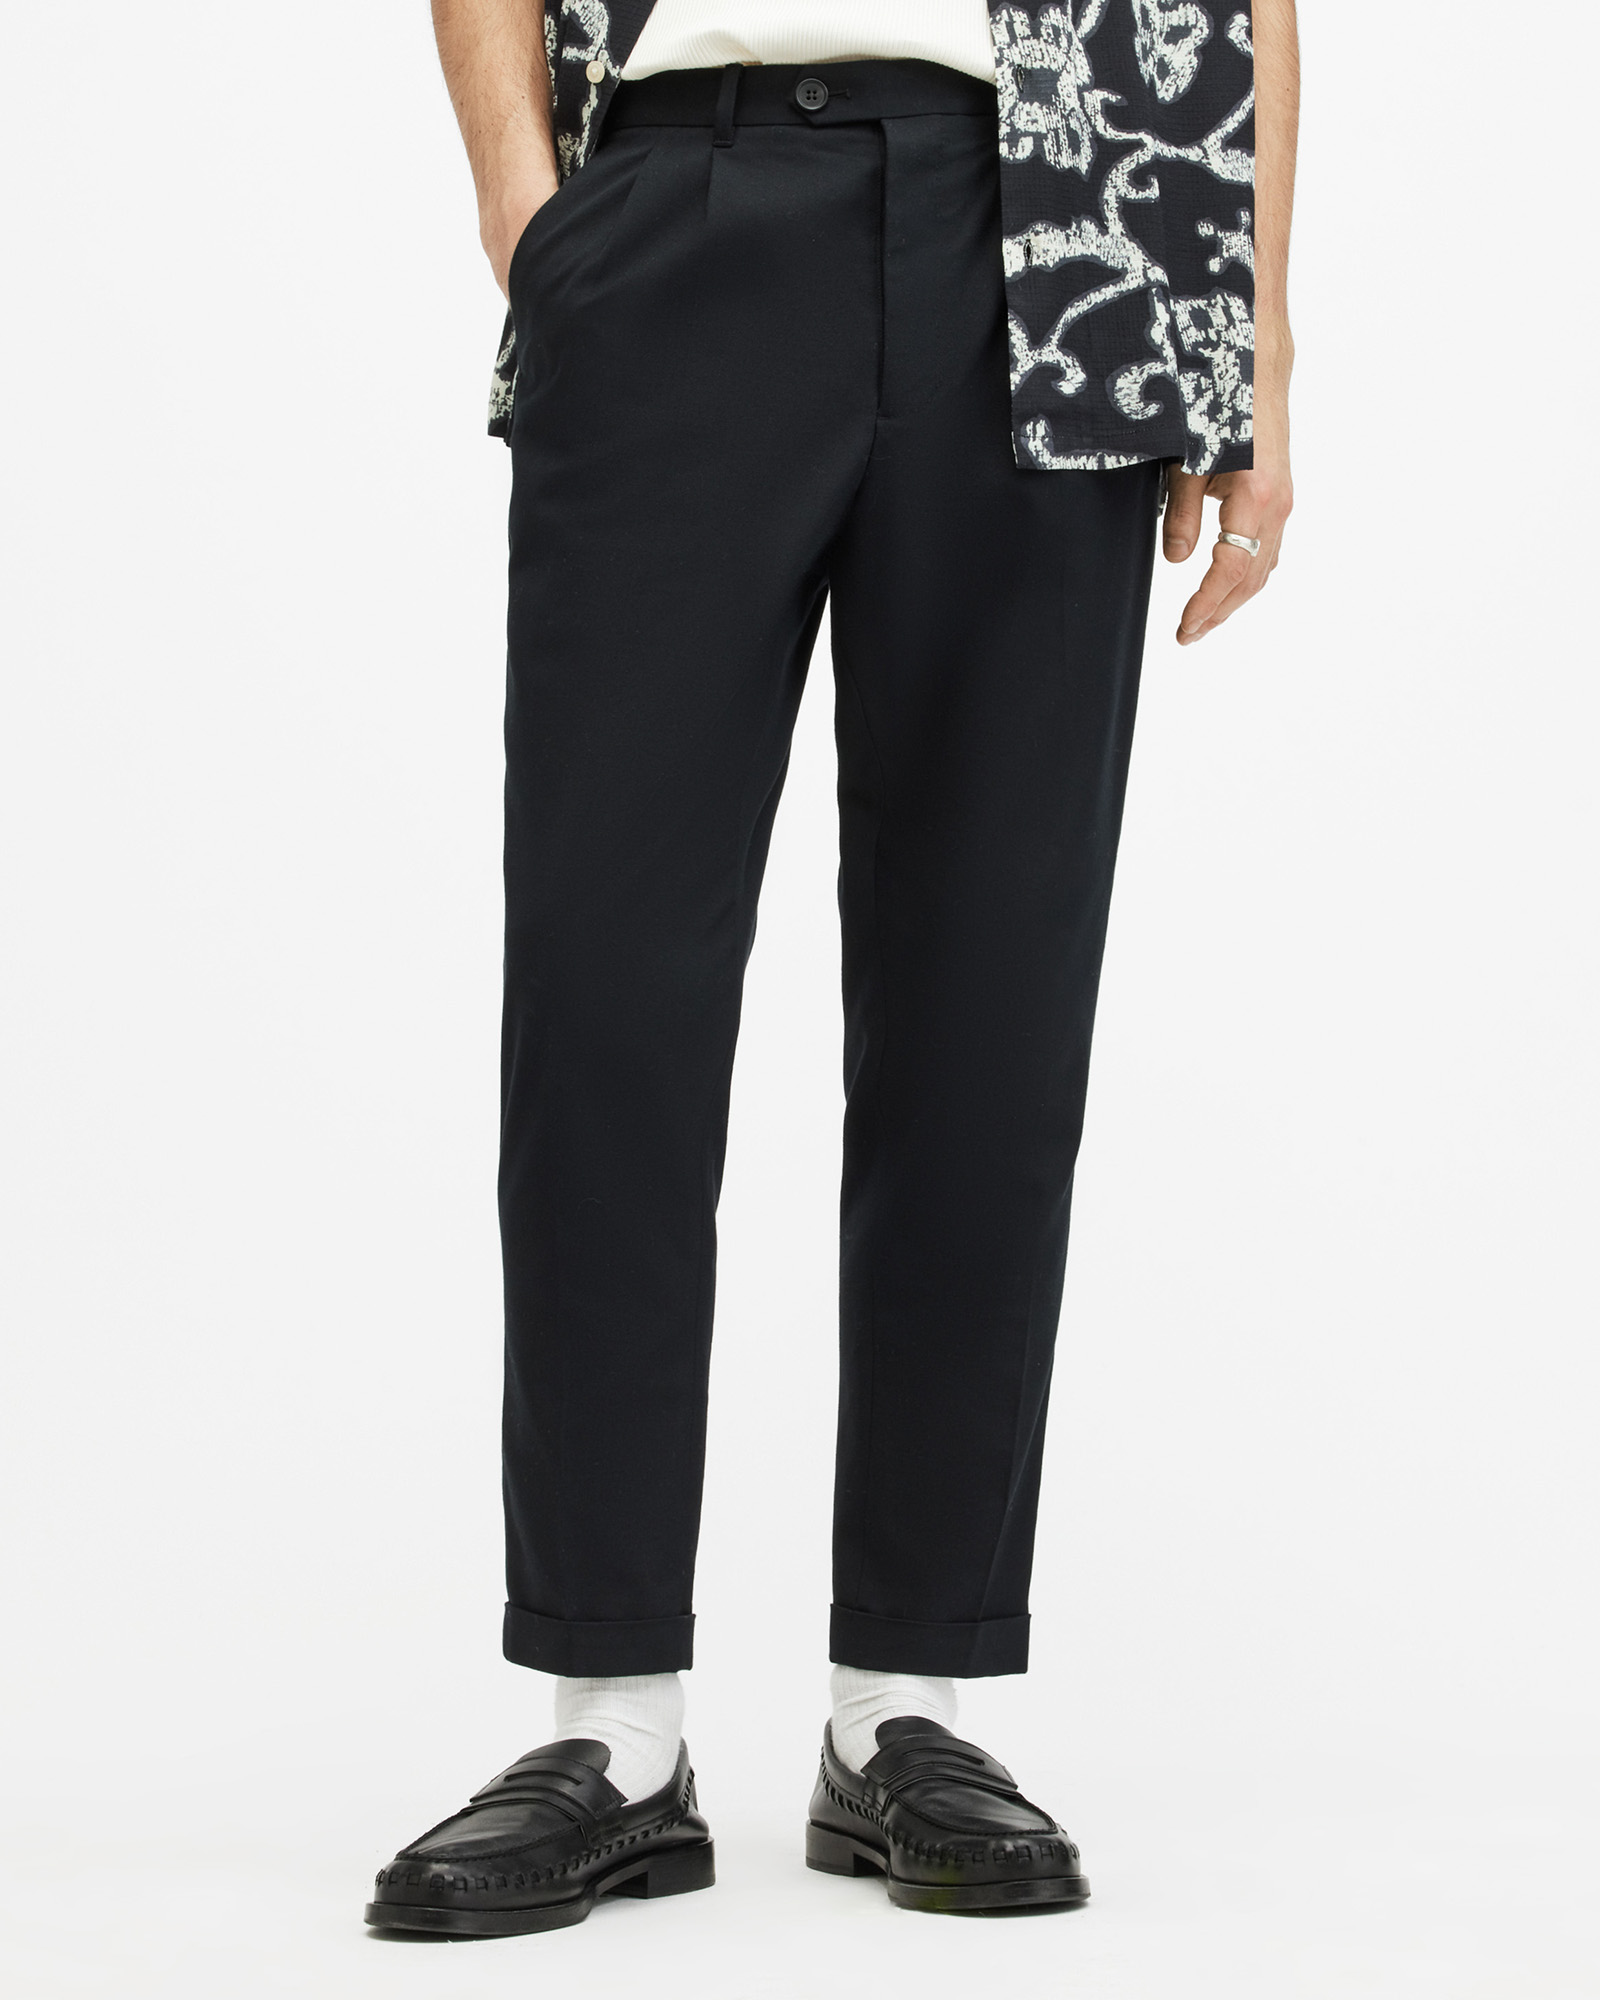 AllSaints Tallis Slim Fit Cropped Tapered Trousers,, Black